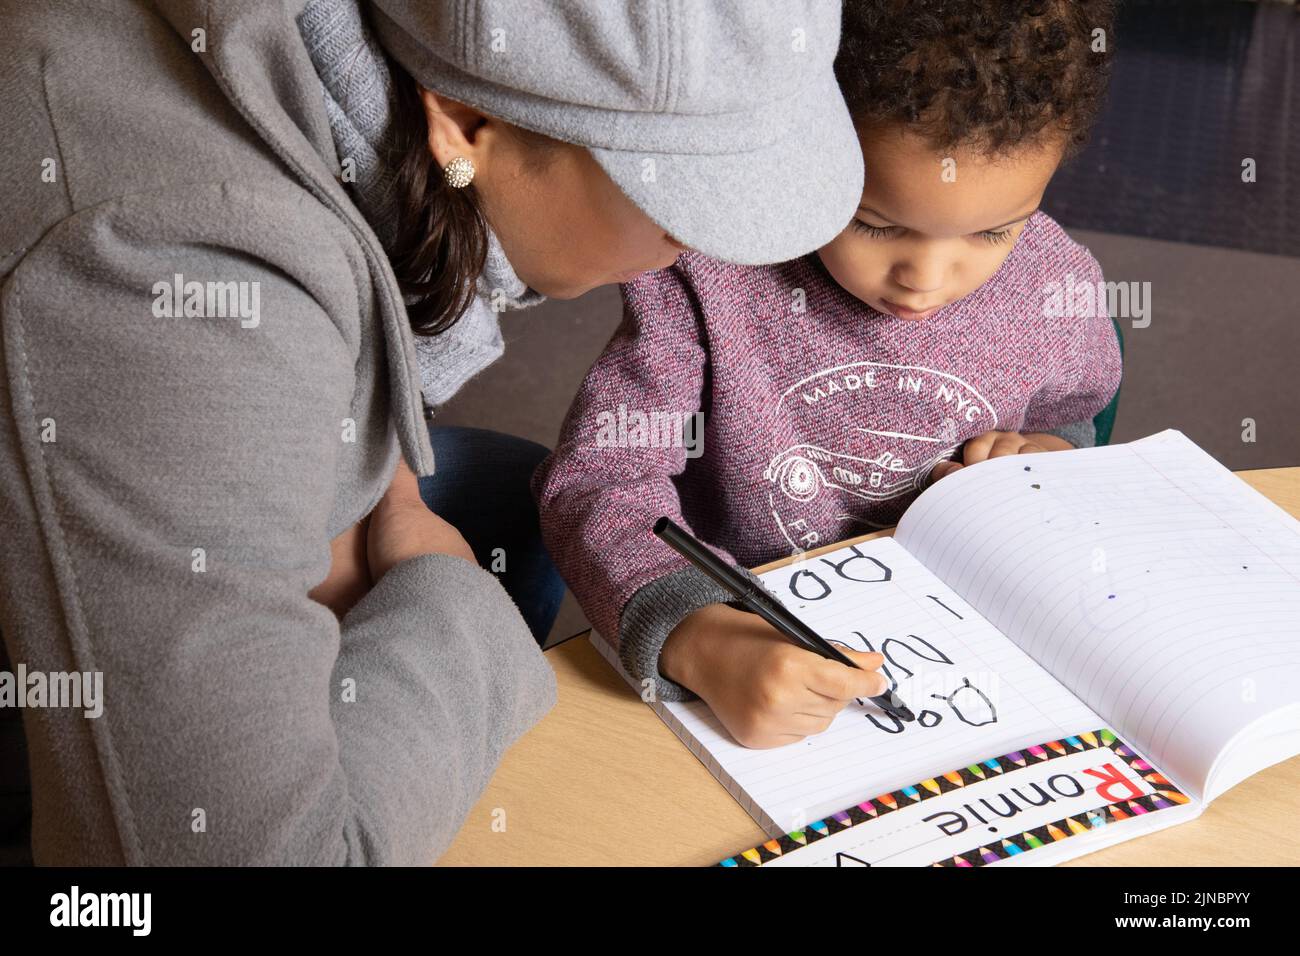 Education Preschool Child Care start of day sigh in routine, parent looking on Stock Photo